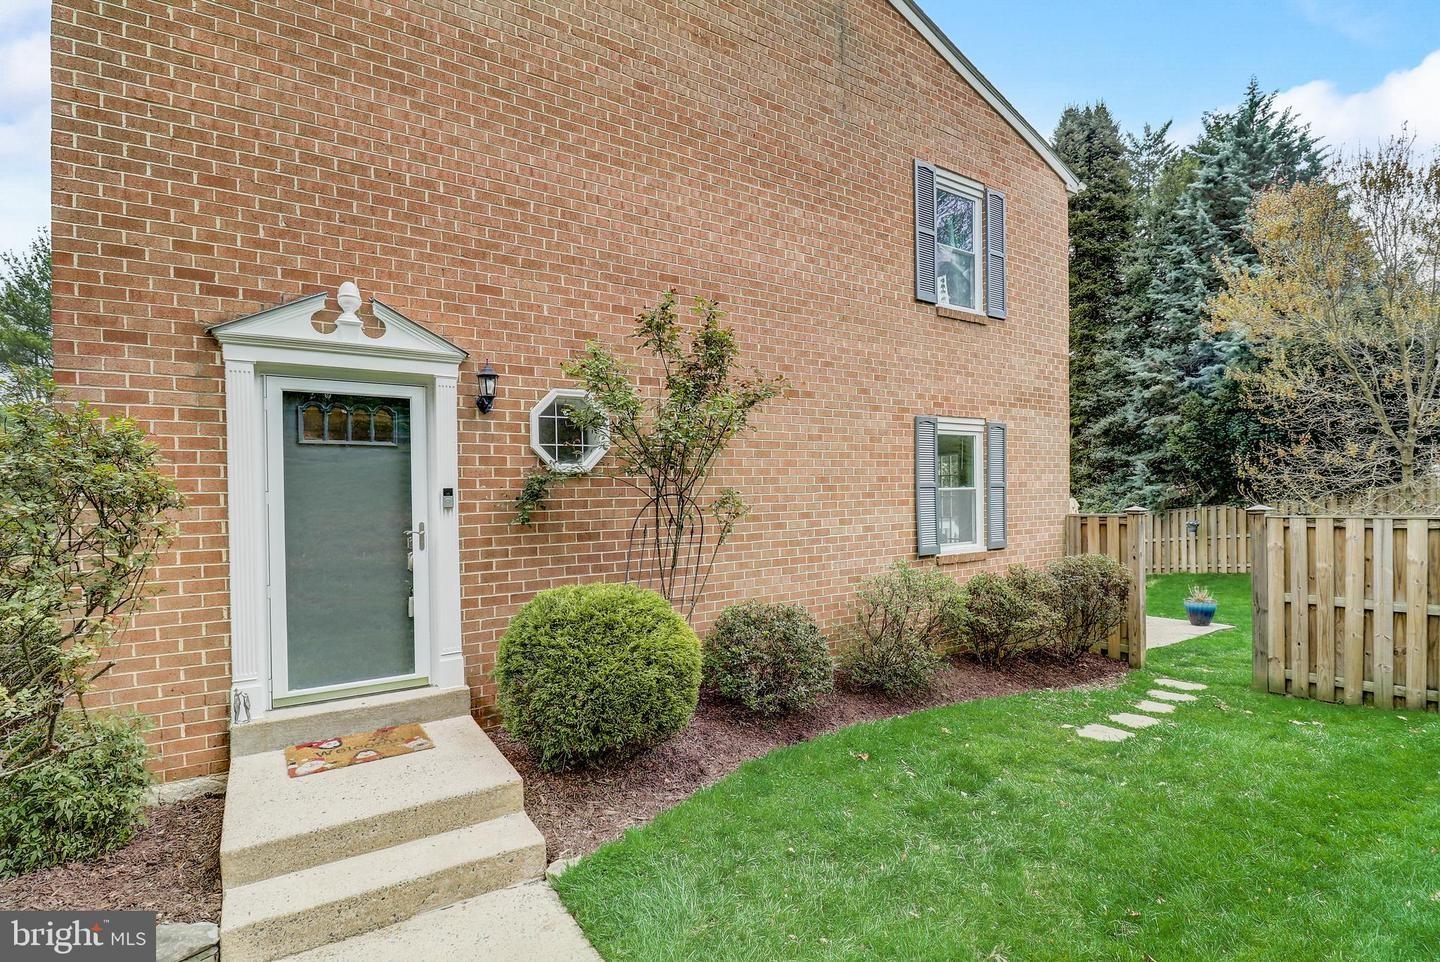 51. 6449 Shannon Station Ct